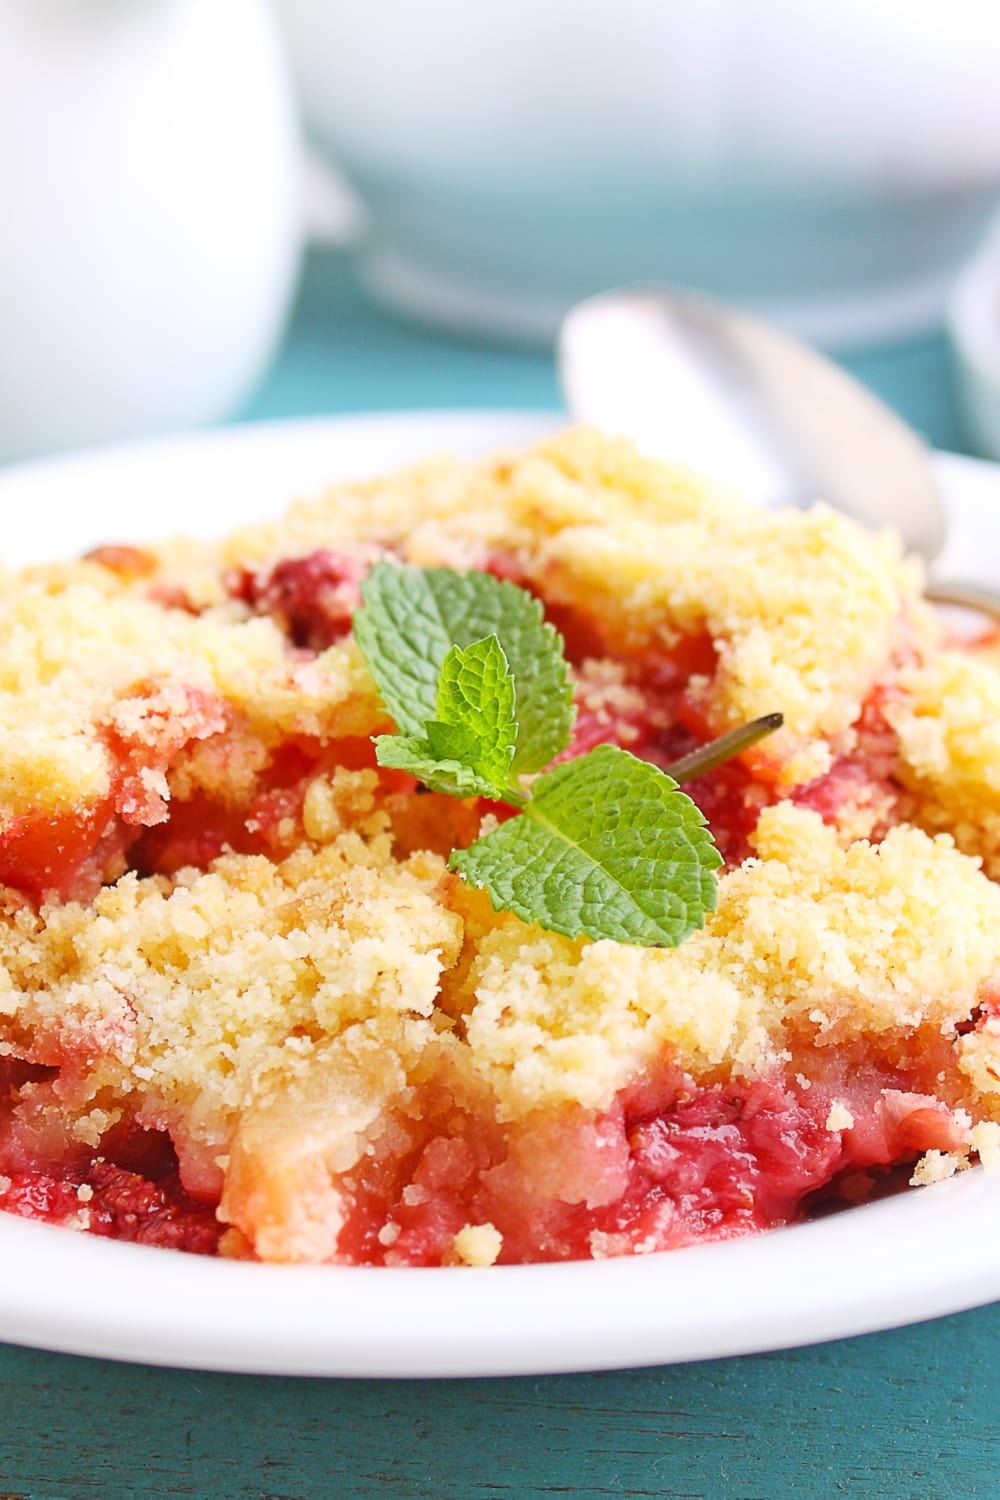 Serving of Strawberry Cobbler on a White Plate